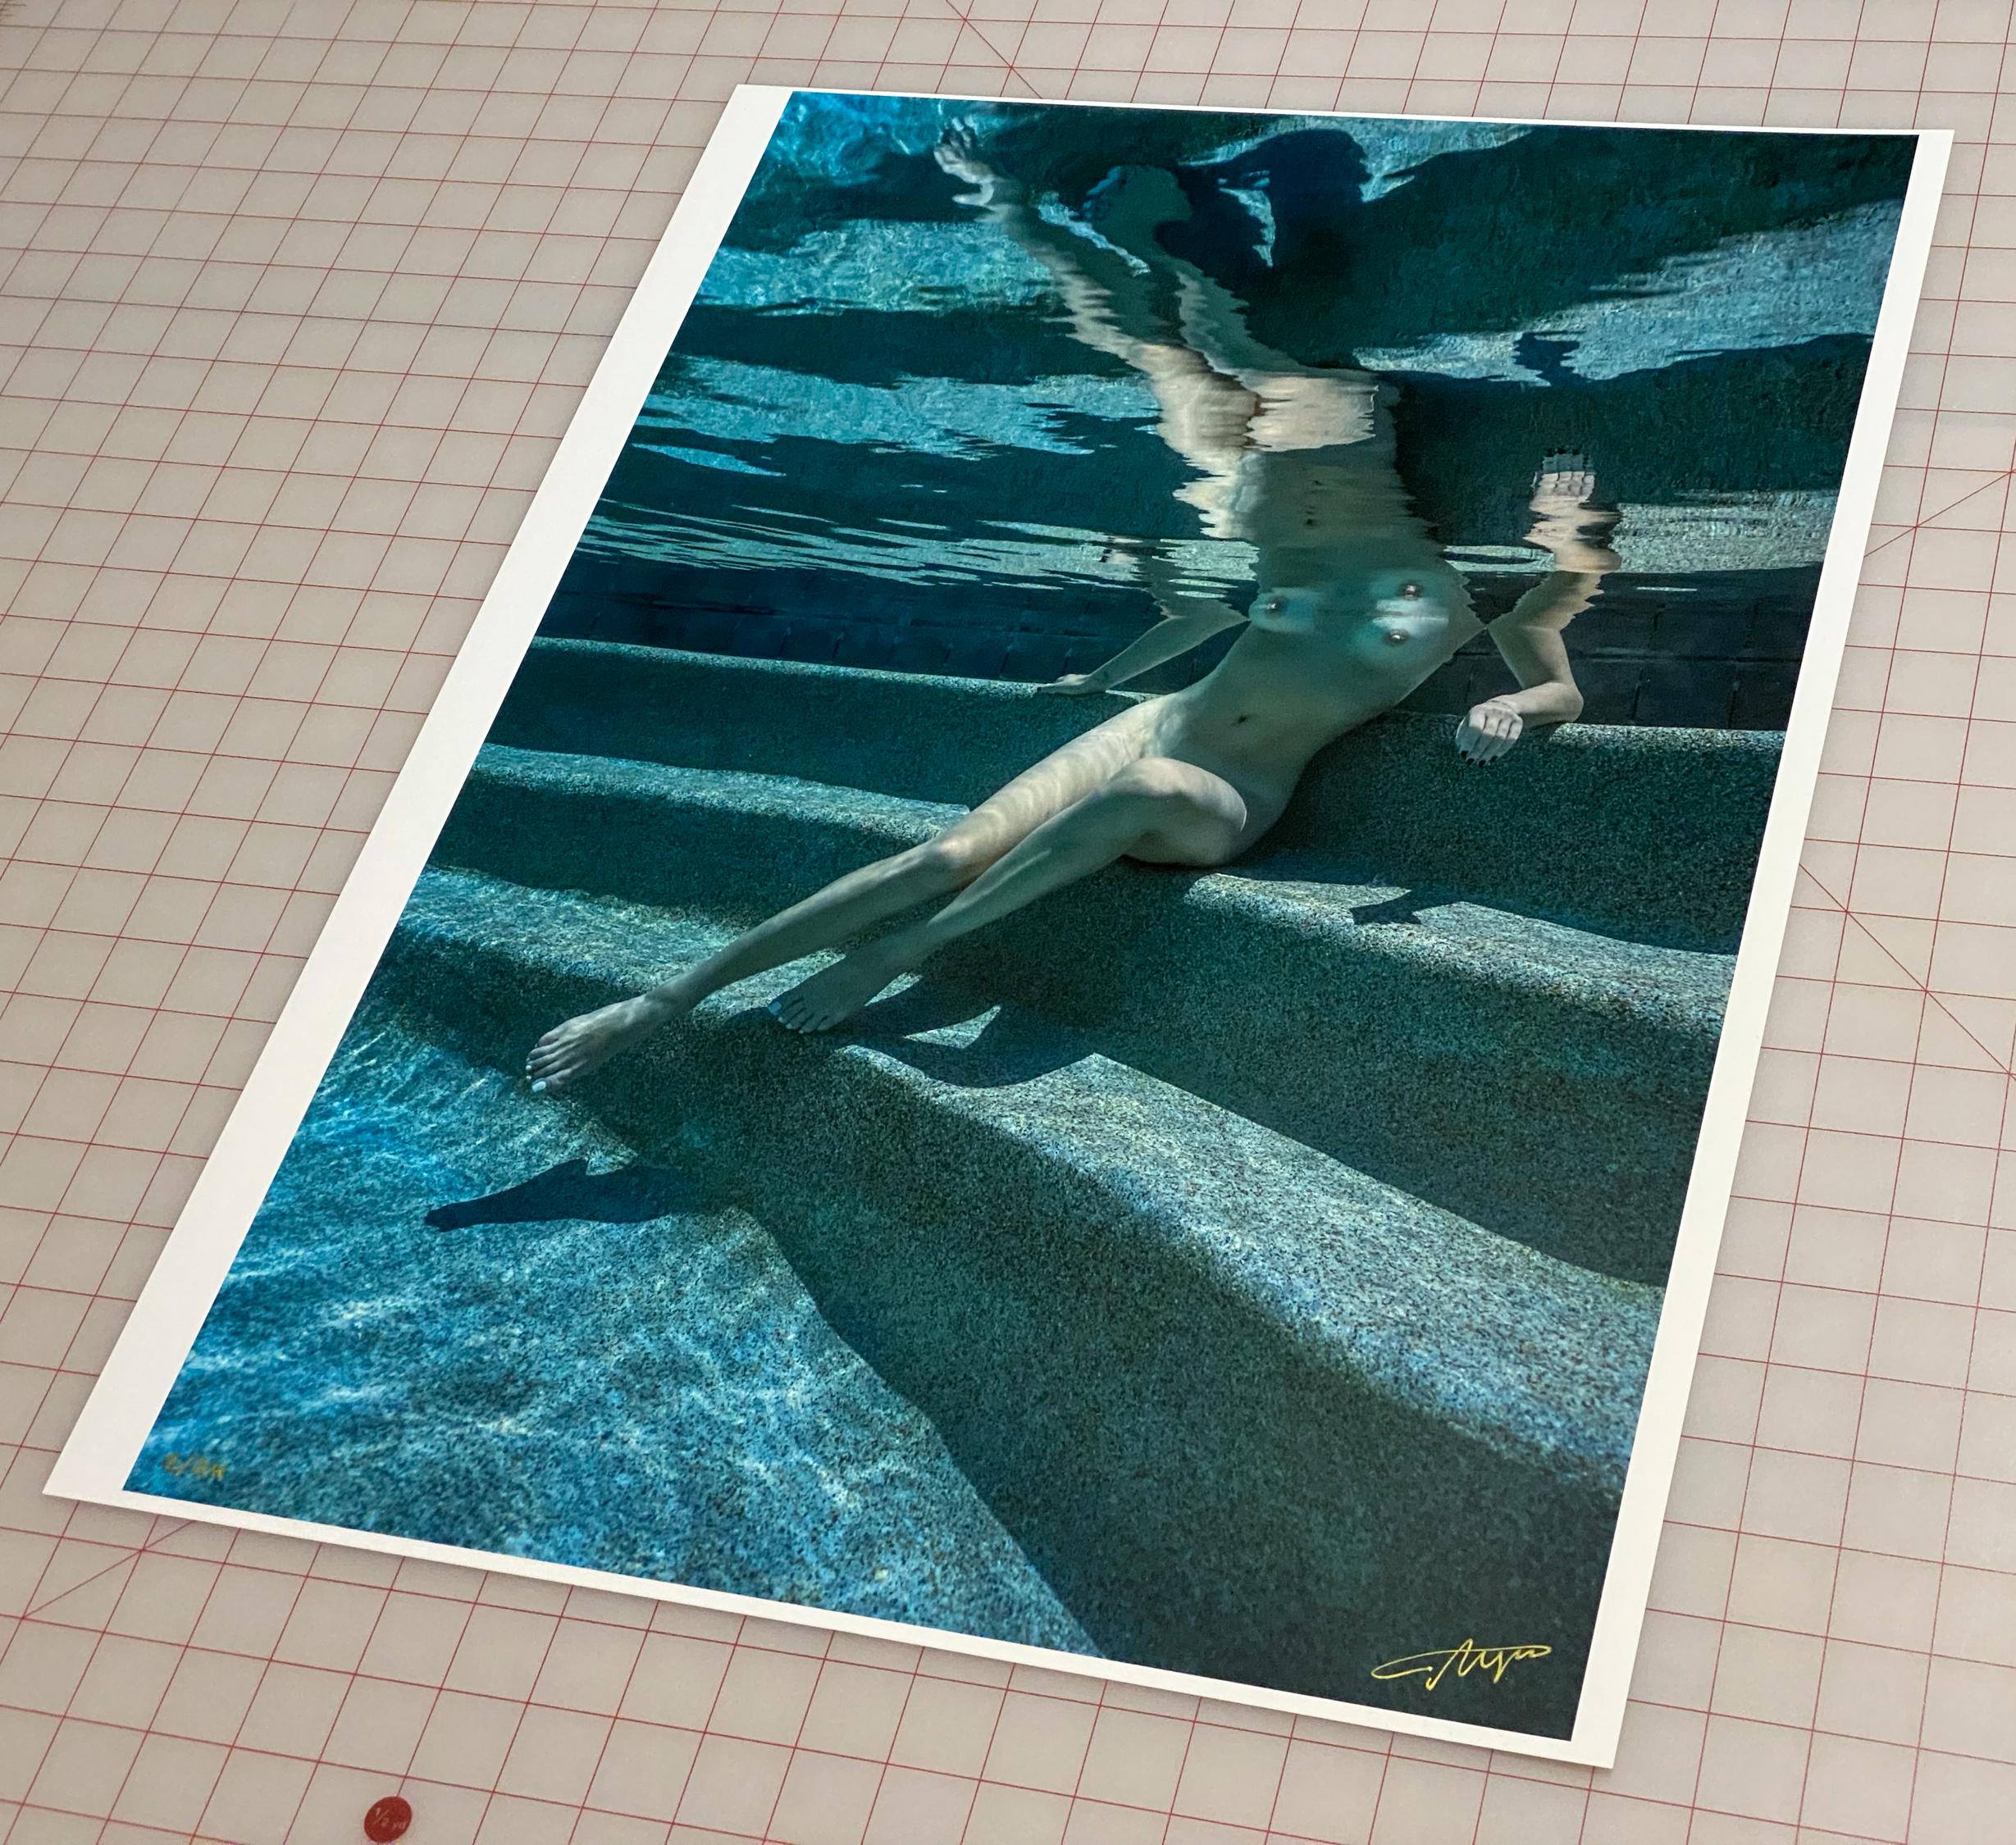 An underwater photograph of a naked young woman sitting on pool steps.  

Original gallery quality print signed by the artist. 
Digital archival pigment print on archival paper with metallic finish. 
Limited edition of 24
Paper size: 36